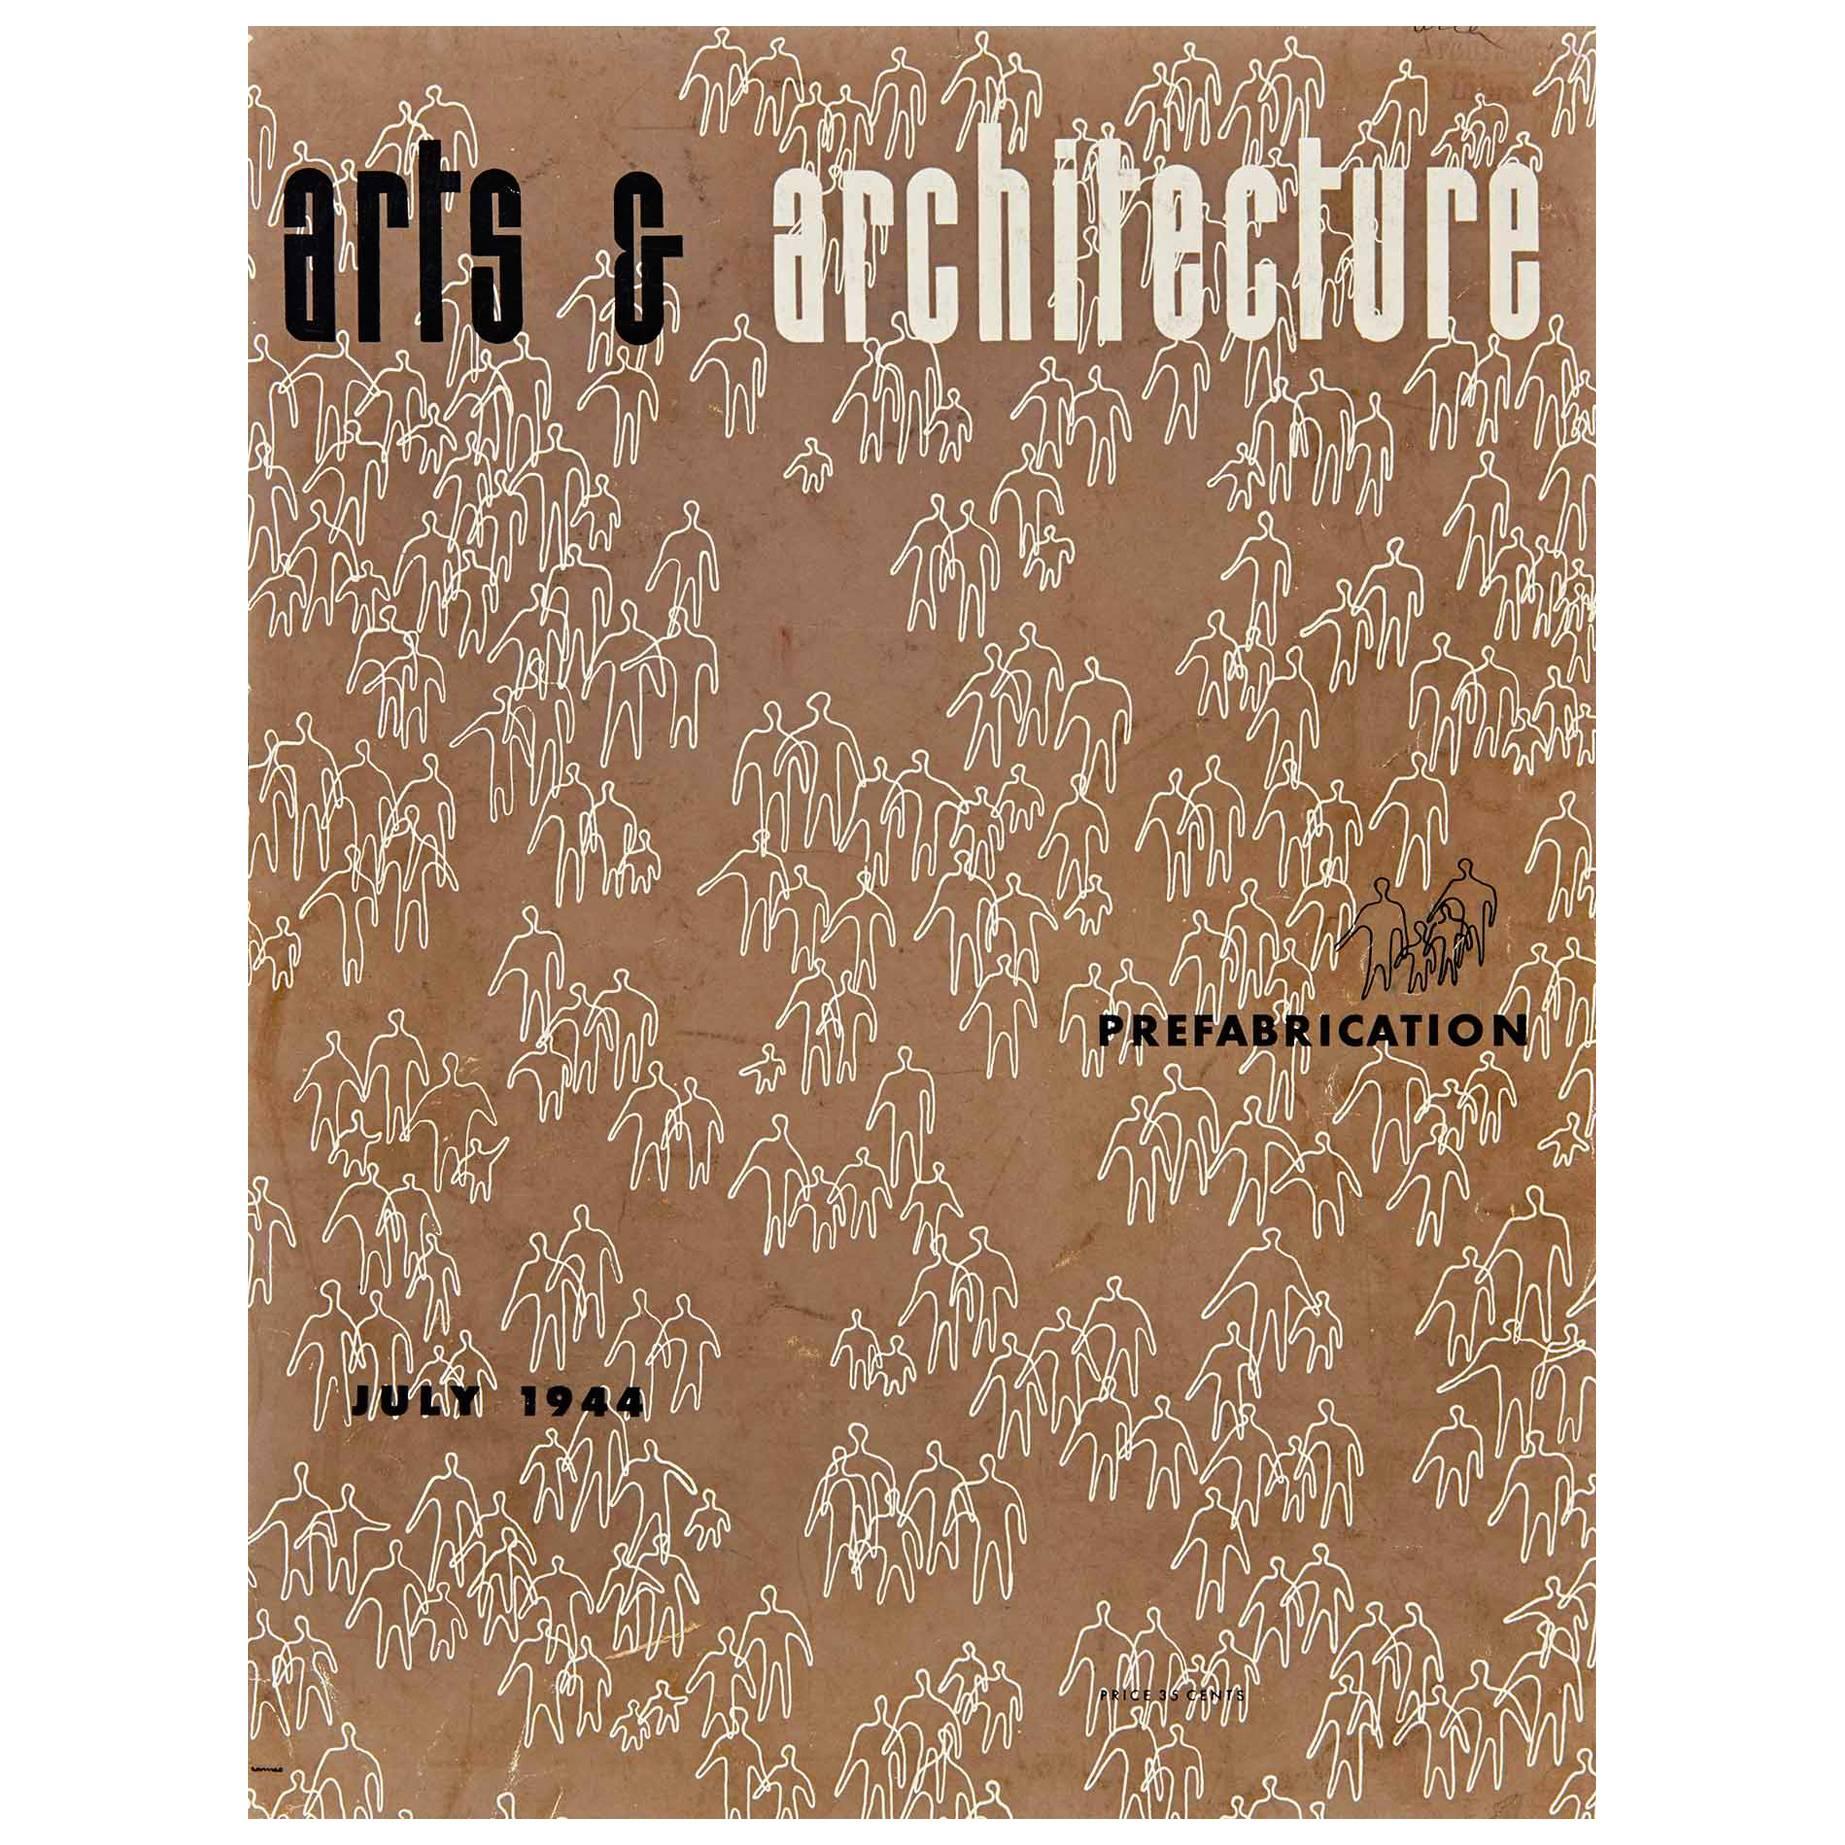 1944 "Arts & Architecture" Magazine Cover by Ray Eames